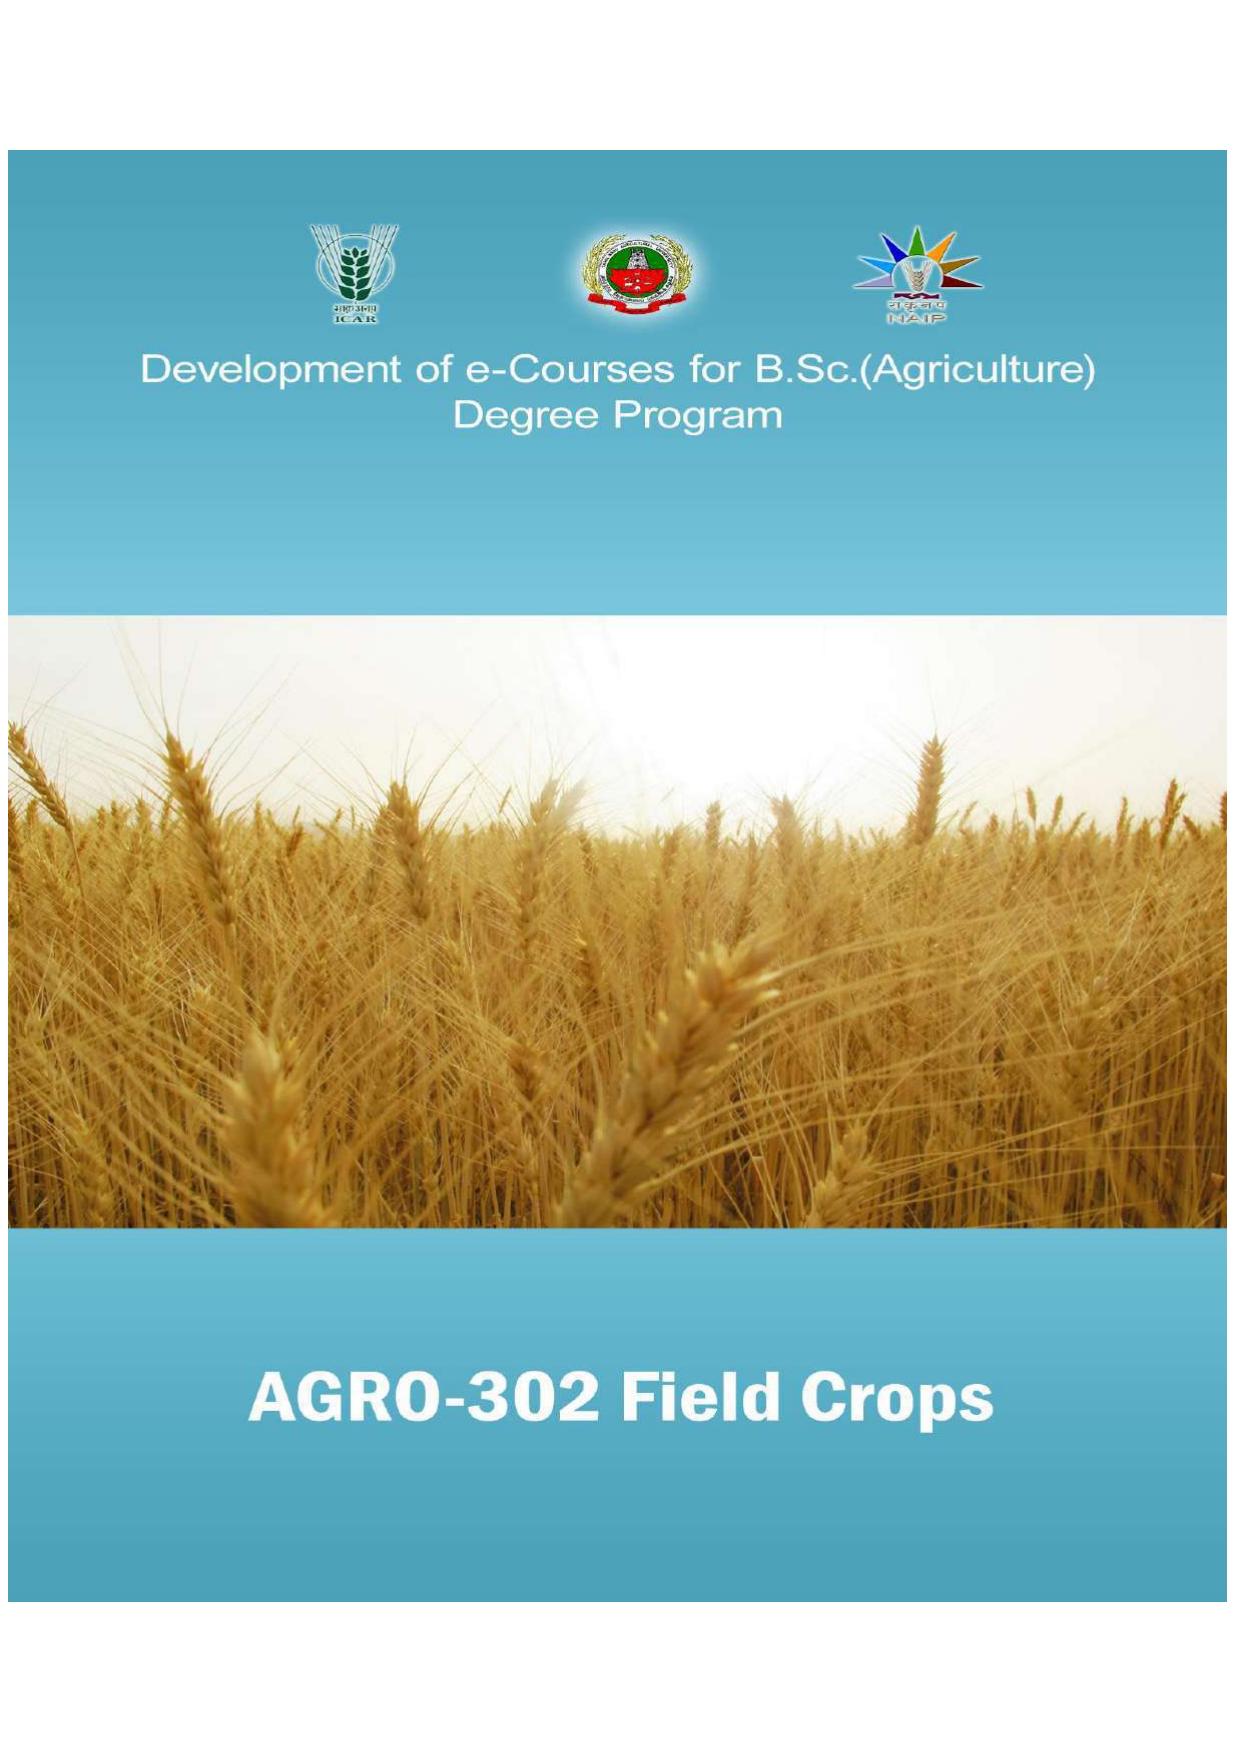 AGRONOMY OF FIELD CROPS-II 2020